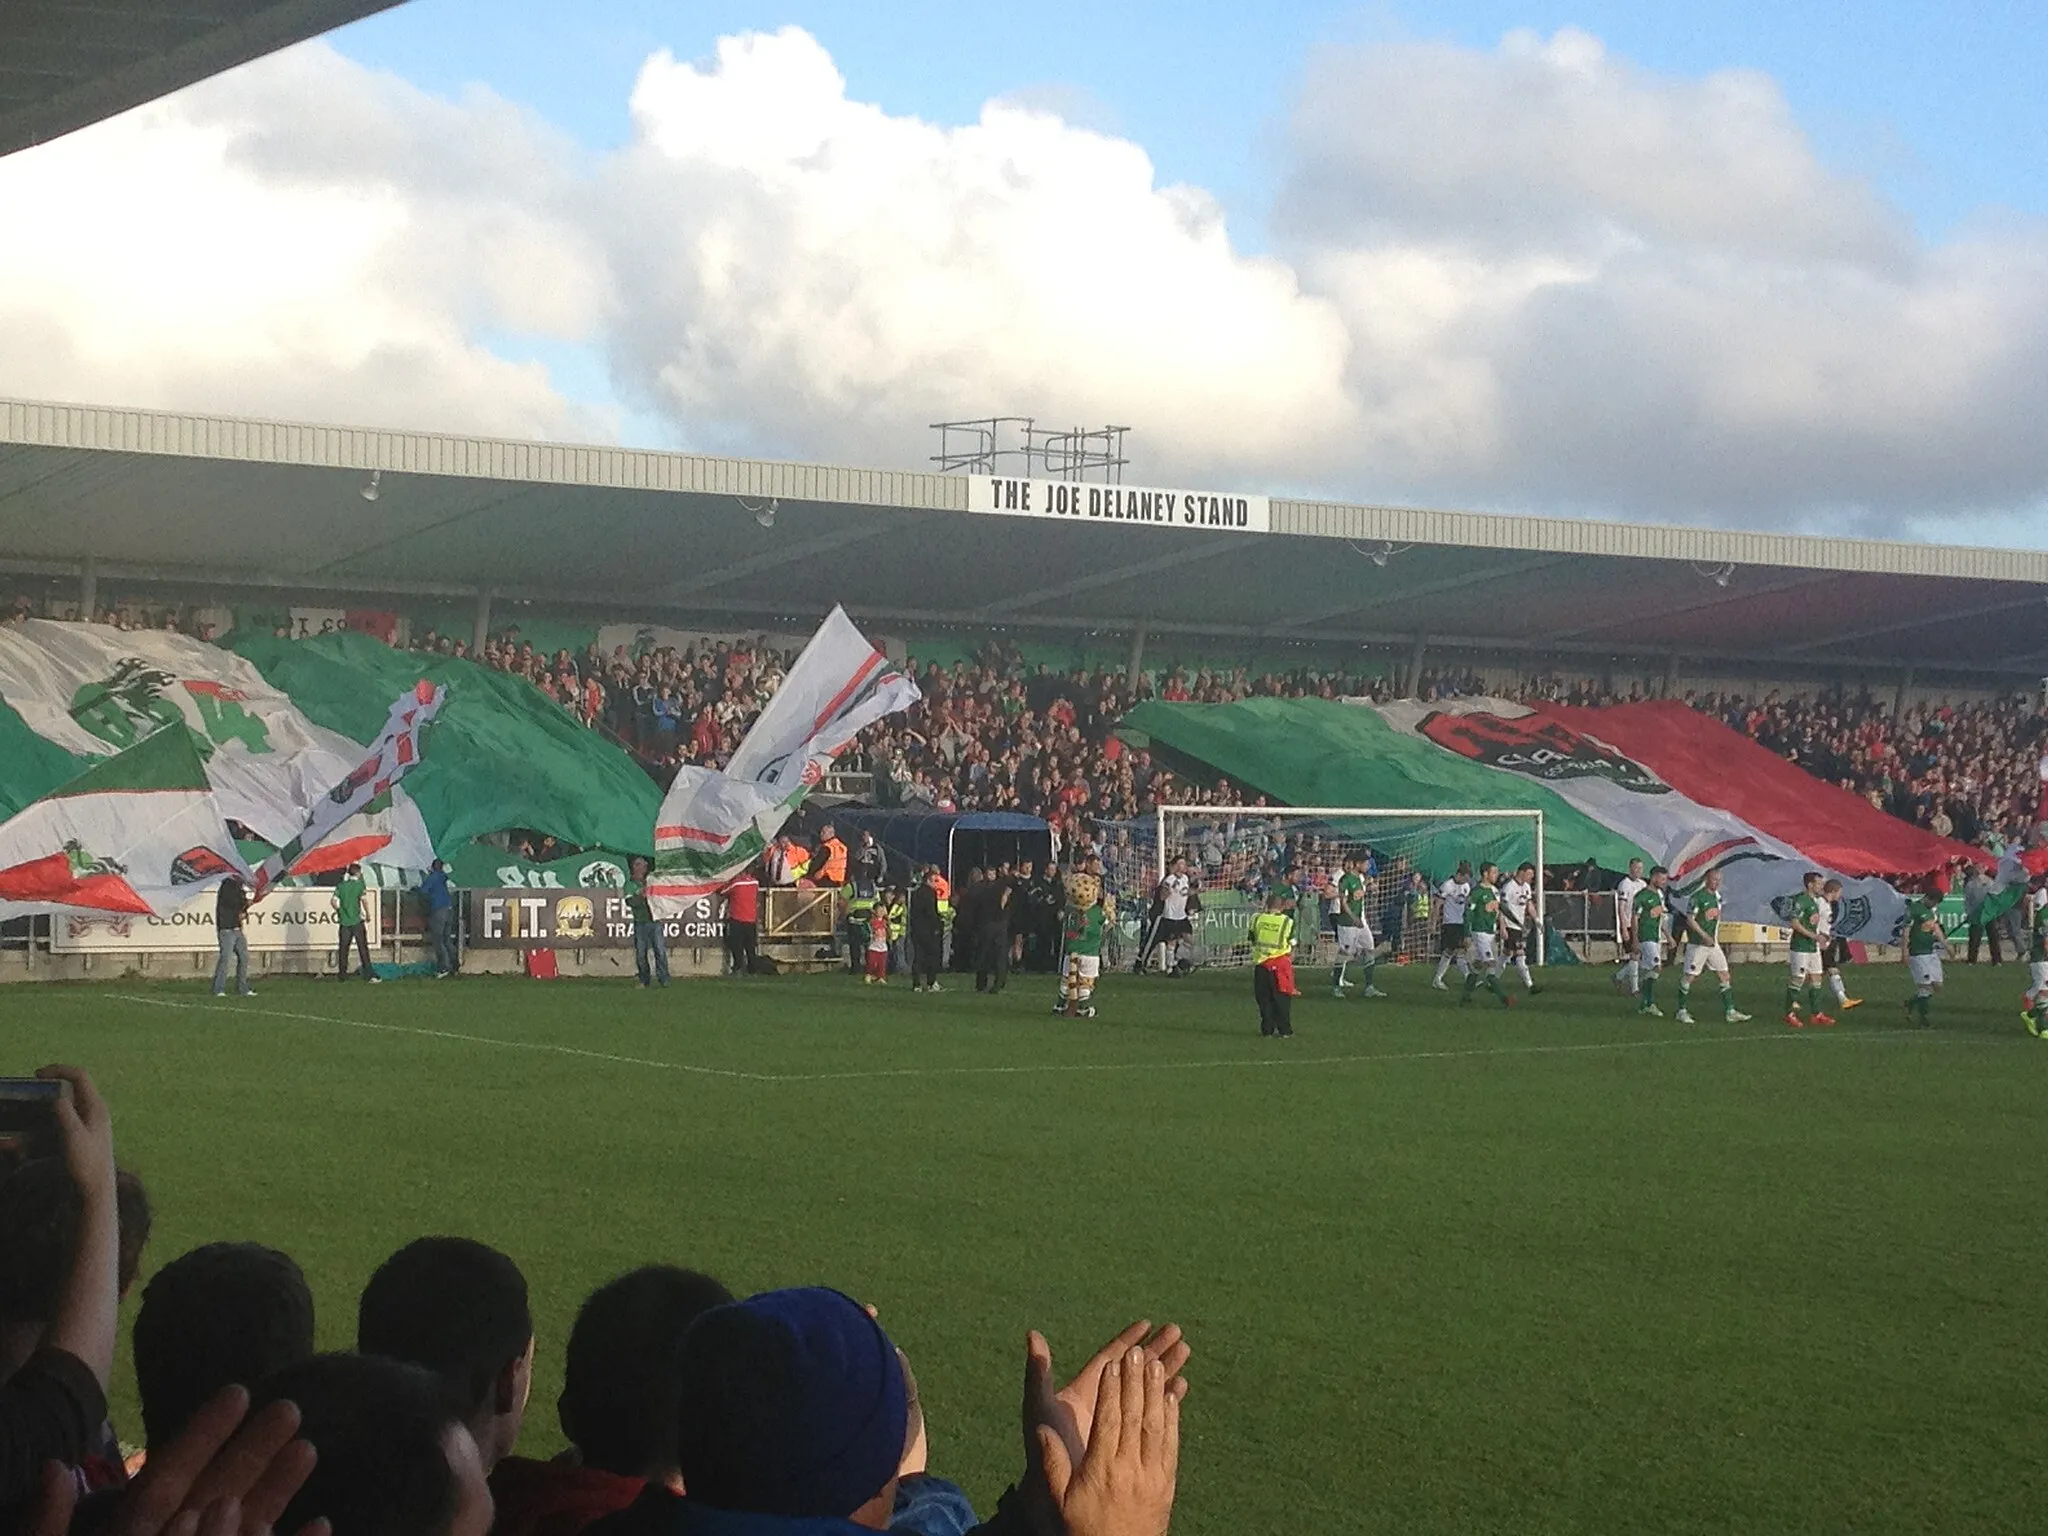 Photo showing: Turners Cross Stadium, Cork, Ireland. Cork City FC's "shed end" supporters display colours as Cork City and Dundalk FC players exit the tunnel. Image taken from Derrynane road stand, looking towards Curragh Road end ("shed end"). The match on 24 April 2015 was played on-front of 6,900 spectators and ended Dundalk 2 Cork City 1.